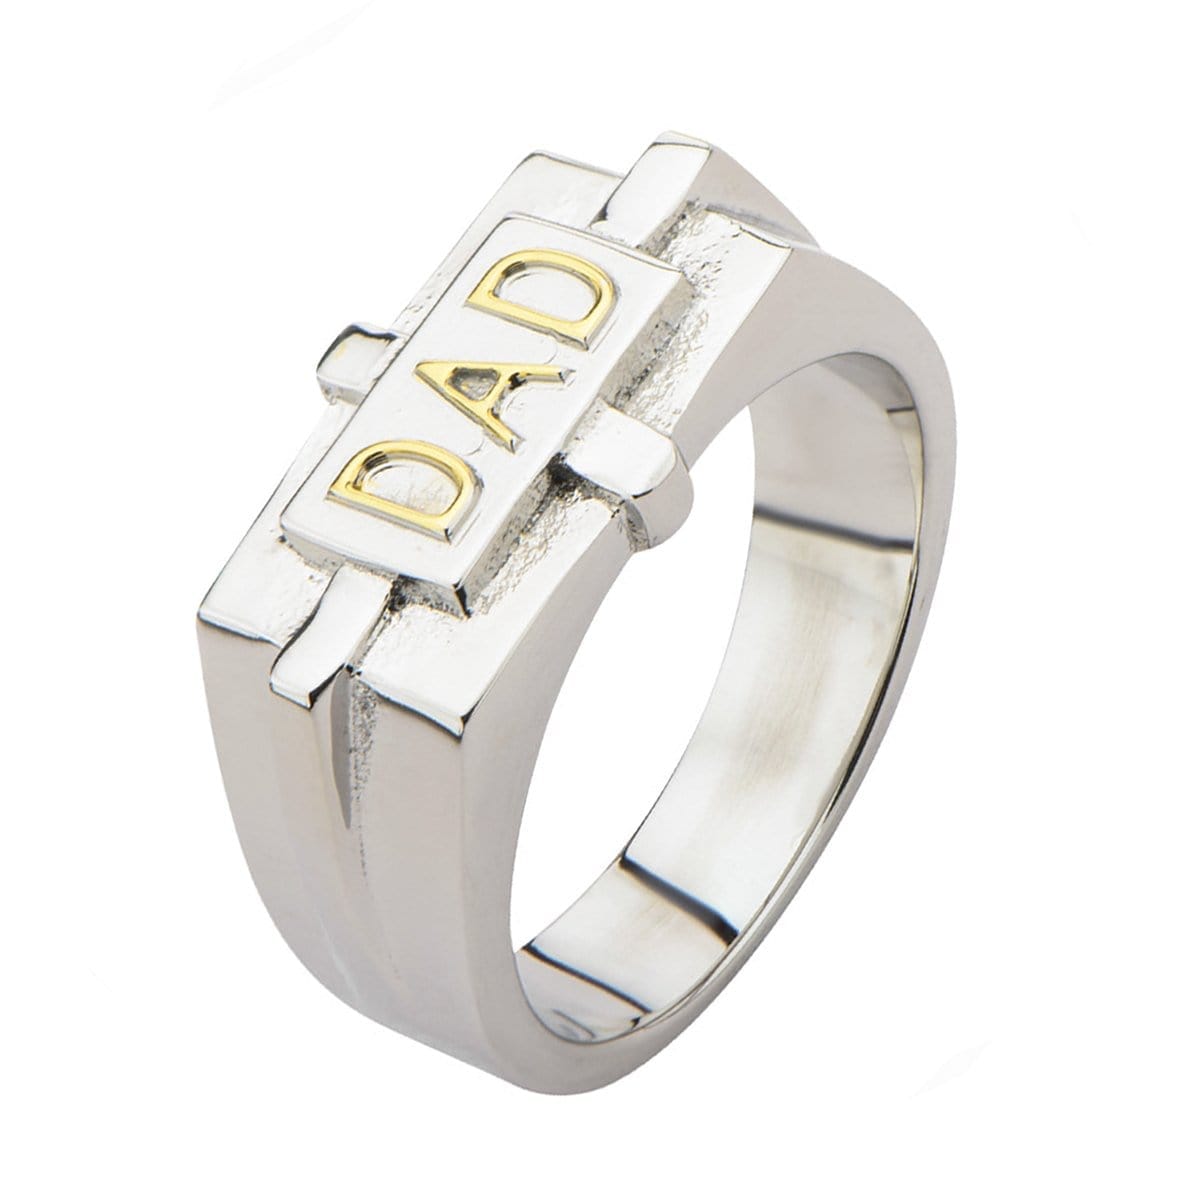 INOX JEWELRY Rings Golden Tone and Silver Tone Stainless Steel DAD Engraved Ring